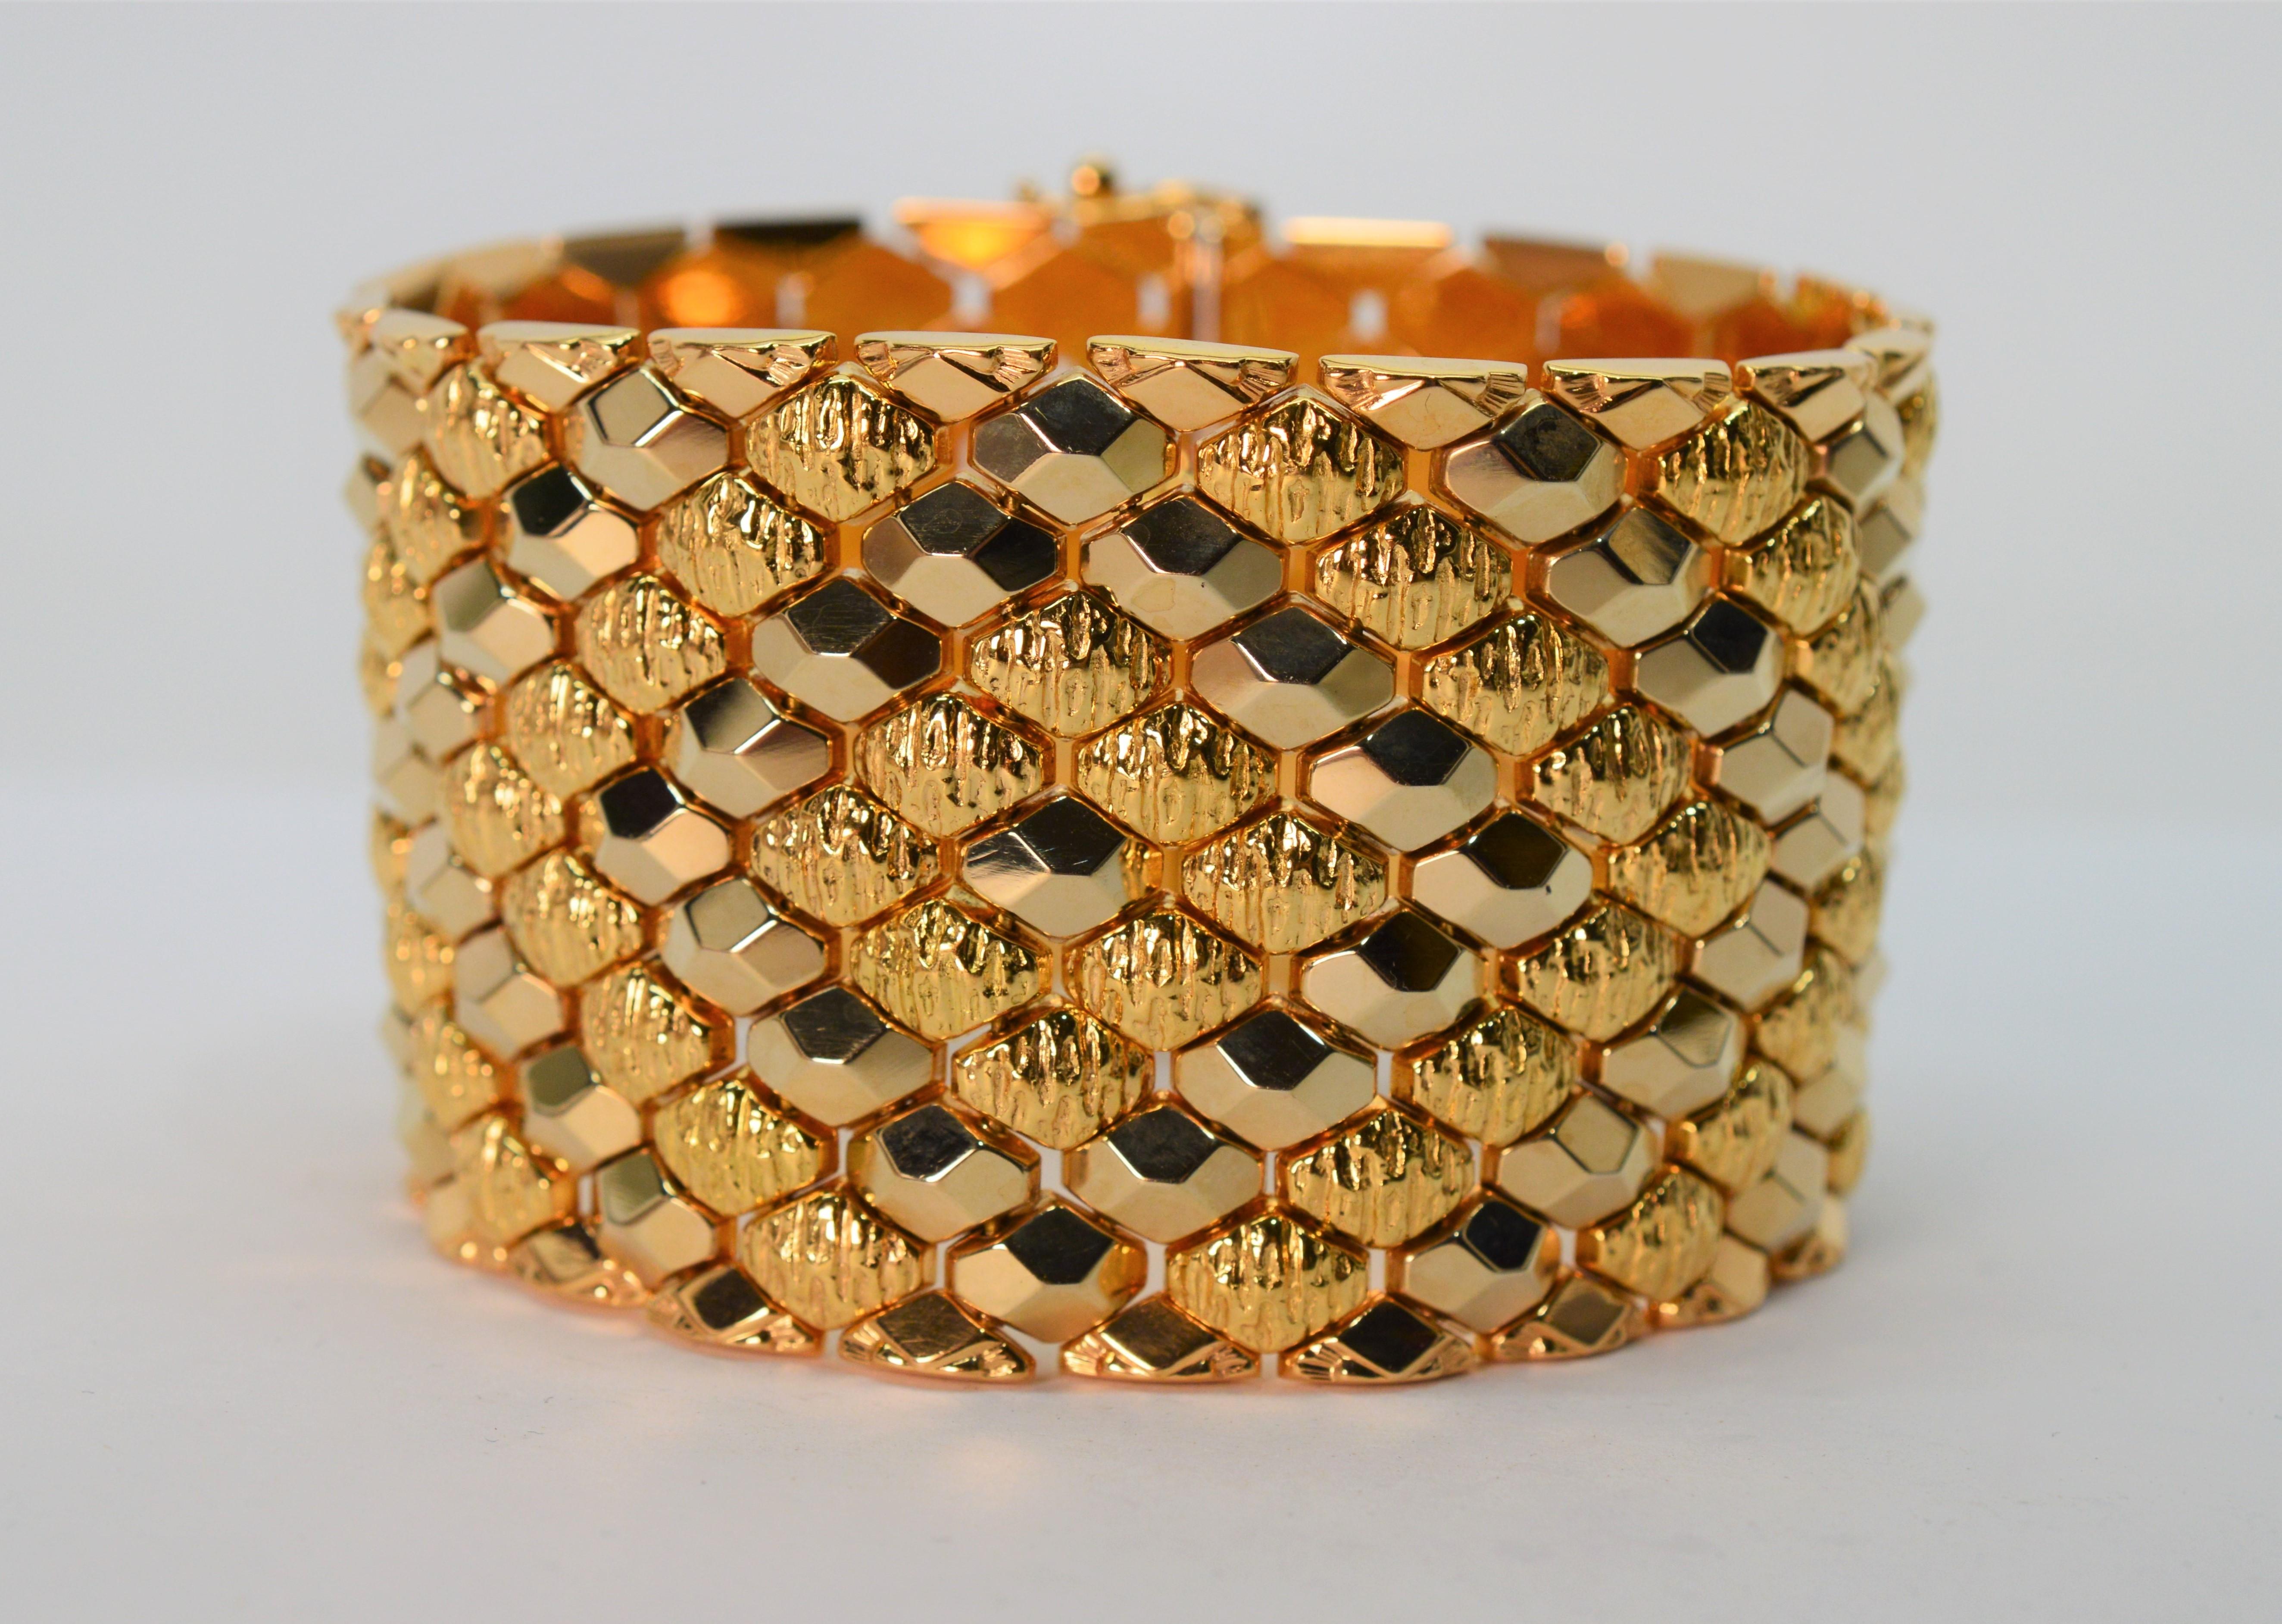 Audaciously gold, this finely Italian made bracelet is superb in rich eighteen karat 18K yellow gold. Striking marquise links in complementing bright polish and textured finishes boldly wraps the wrist in this generous 1-5/8 inch wide flexible cuff